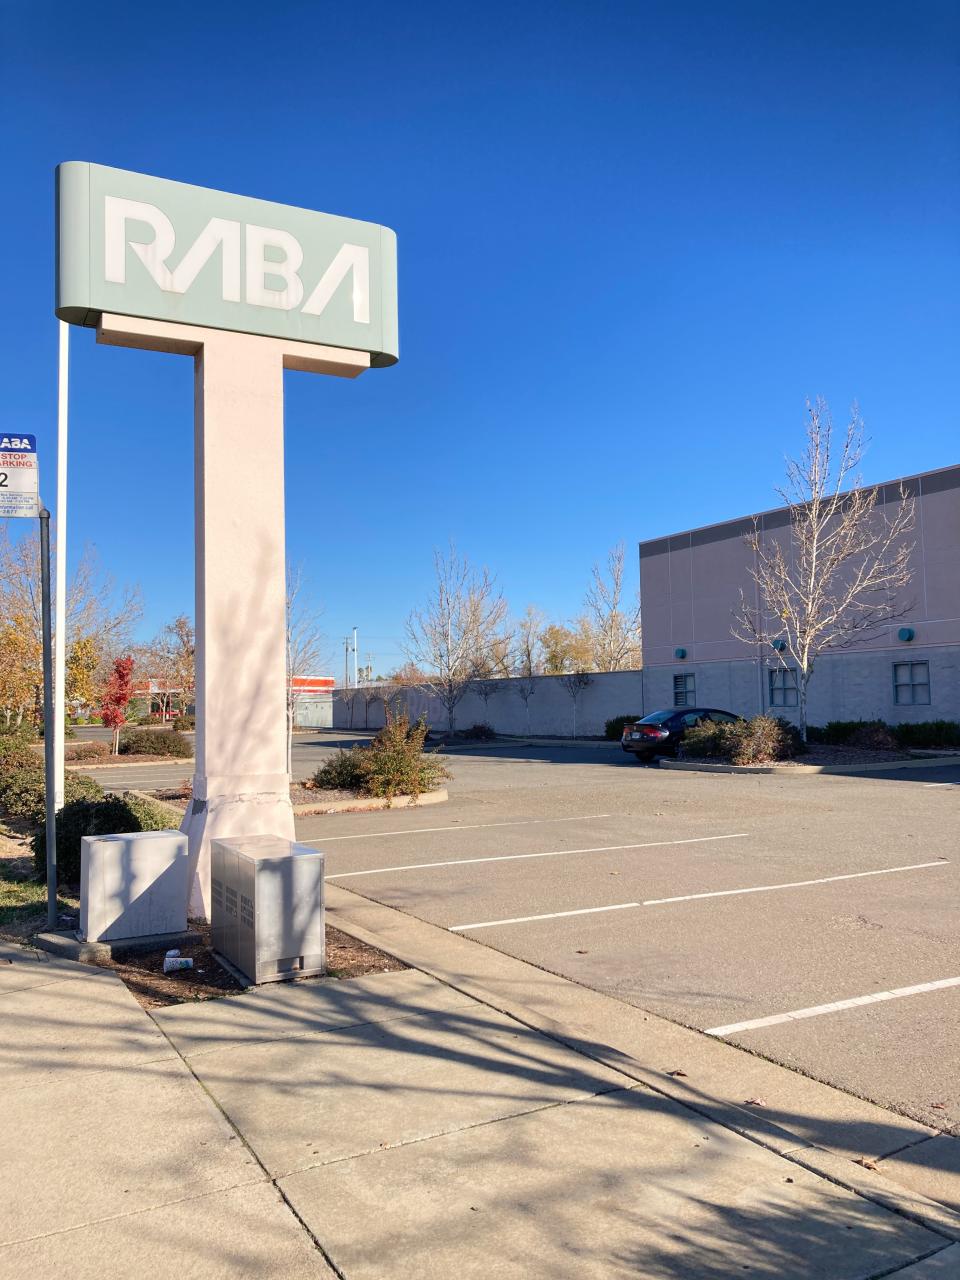 RABA headquarters at the corner of South Market and Ellis streets in Redding.